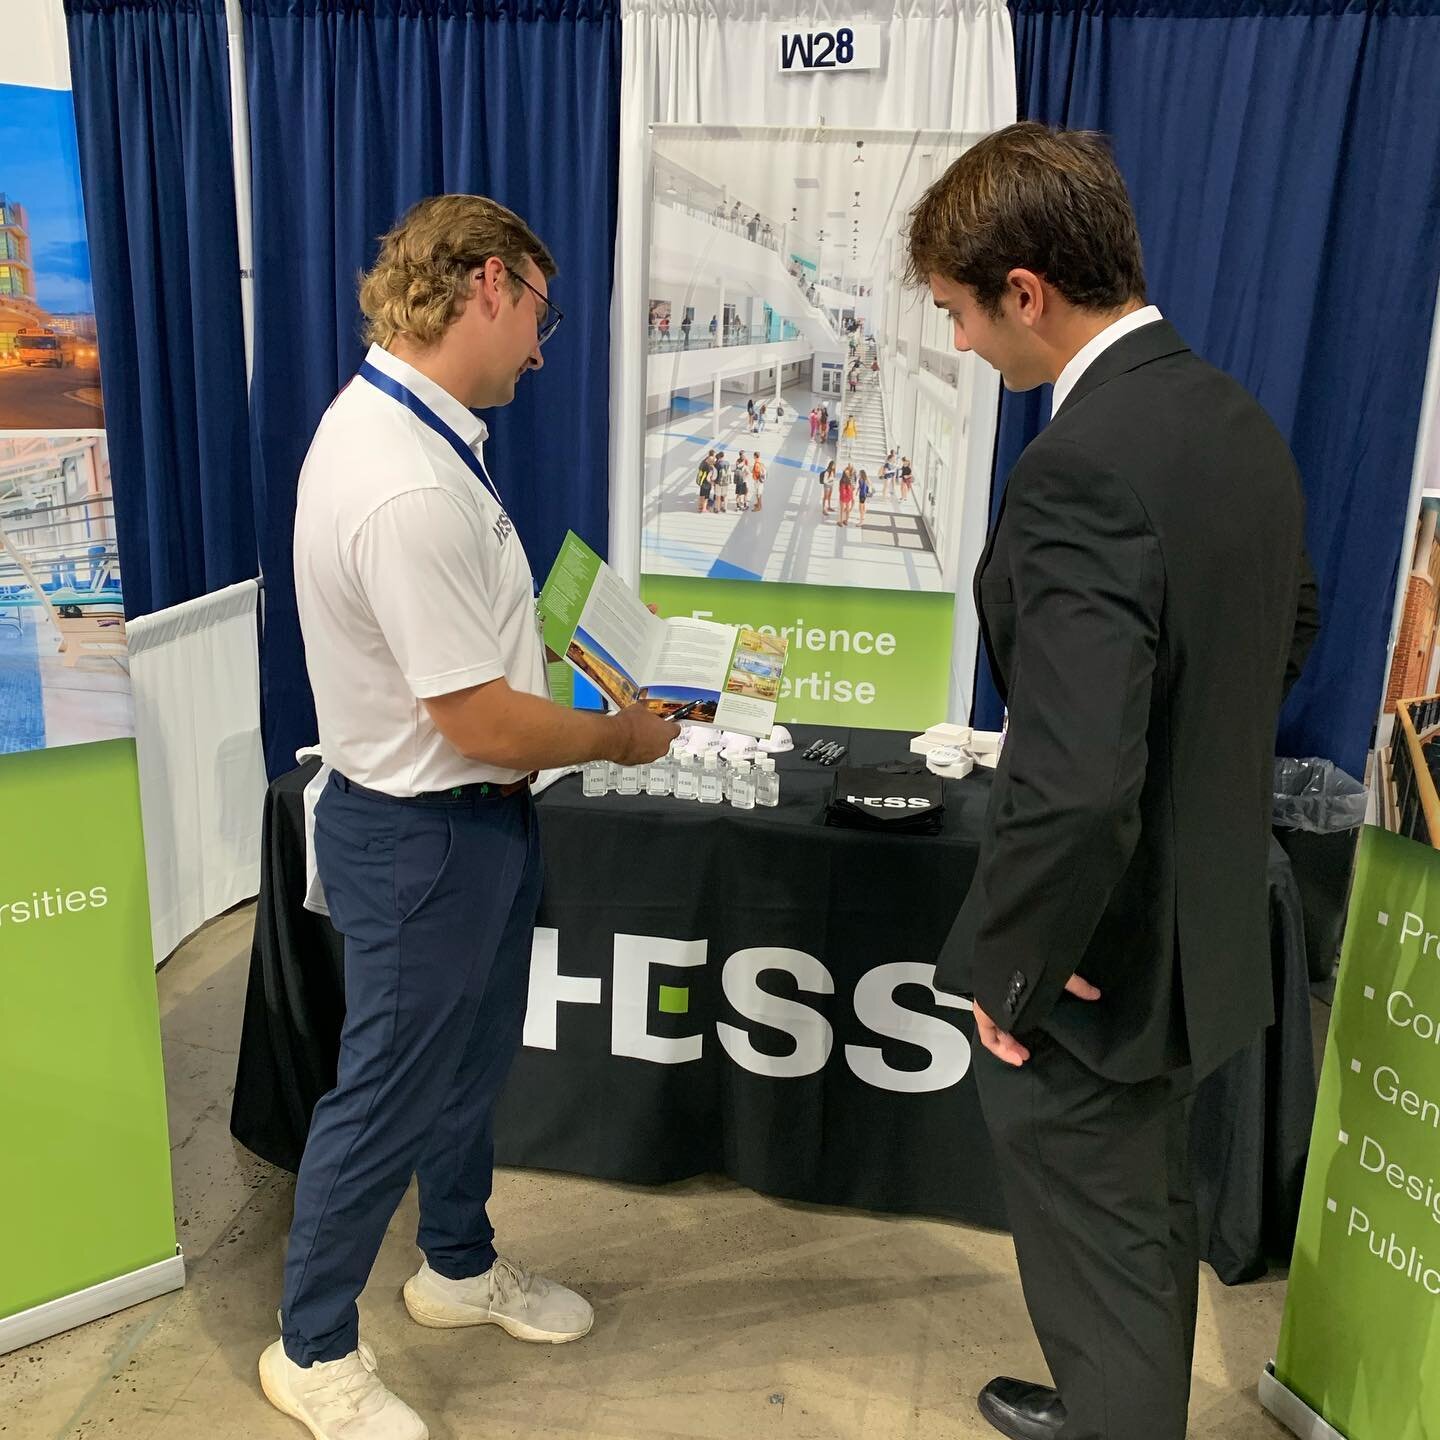 🗣 Calling all Nittany Lions! We&rsquo;re out at the Architectural Engineering Career &amp; Internship Fair at the Bryce Jordan Center. Come see us at our HESS booth (W 28) and learn about our summer internship program and full time career opportunit